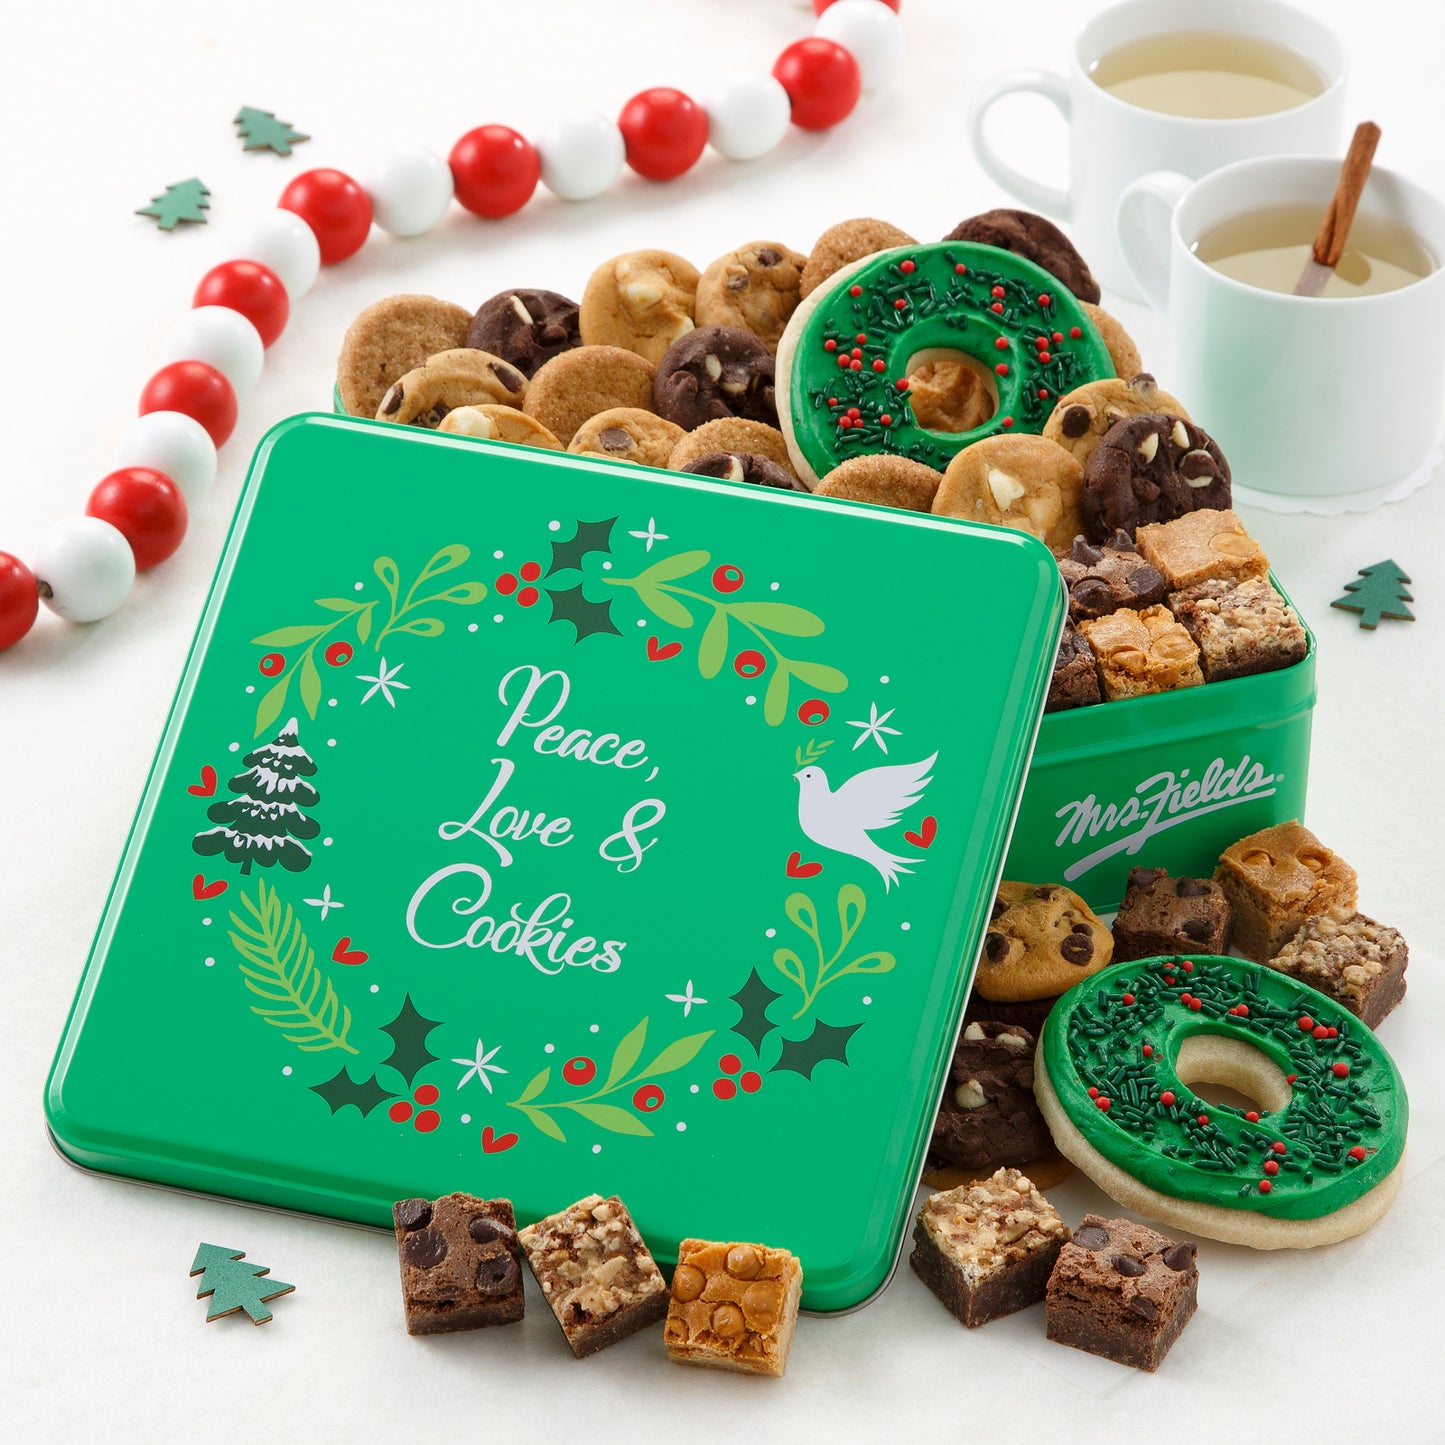 Green Peace, Love & Cookies decorated with a holiday wreath and filled with Nibblers®, brownie bites, and two frosted wreath cookies with sprinkles.